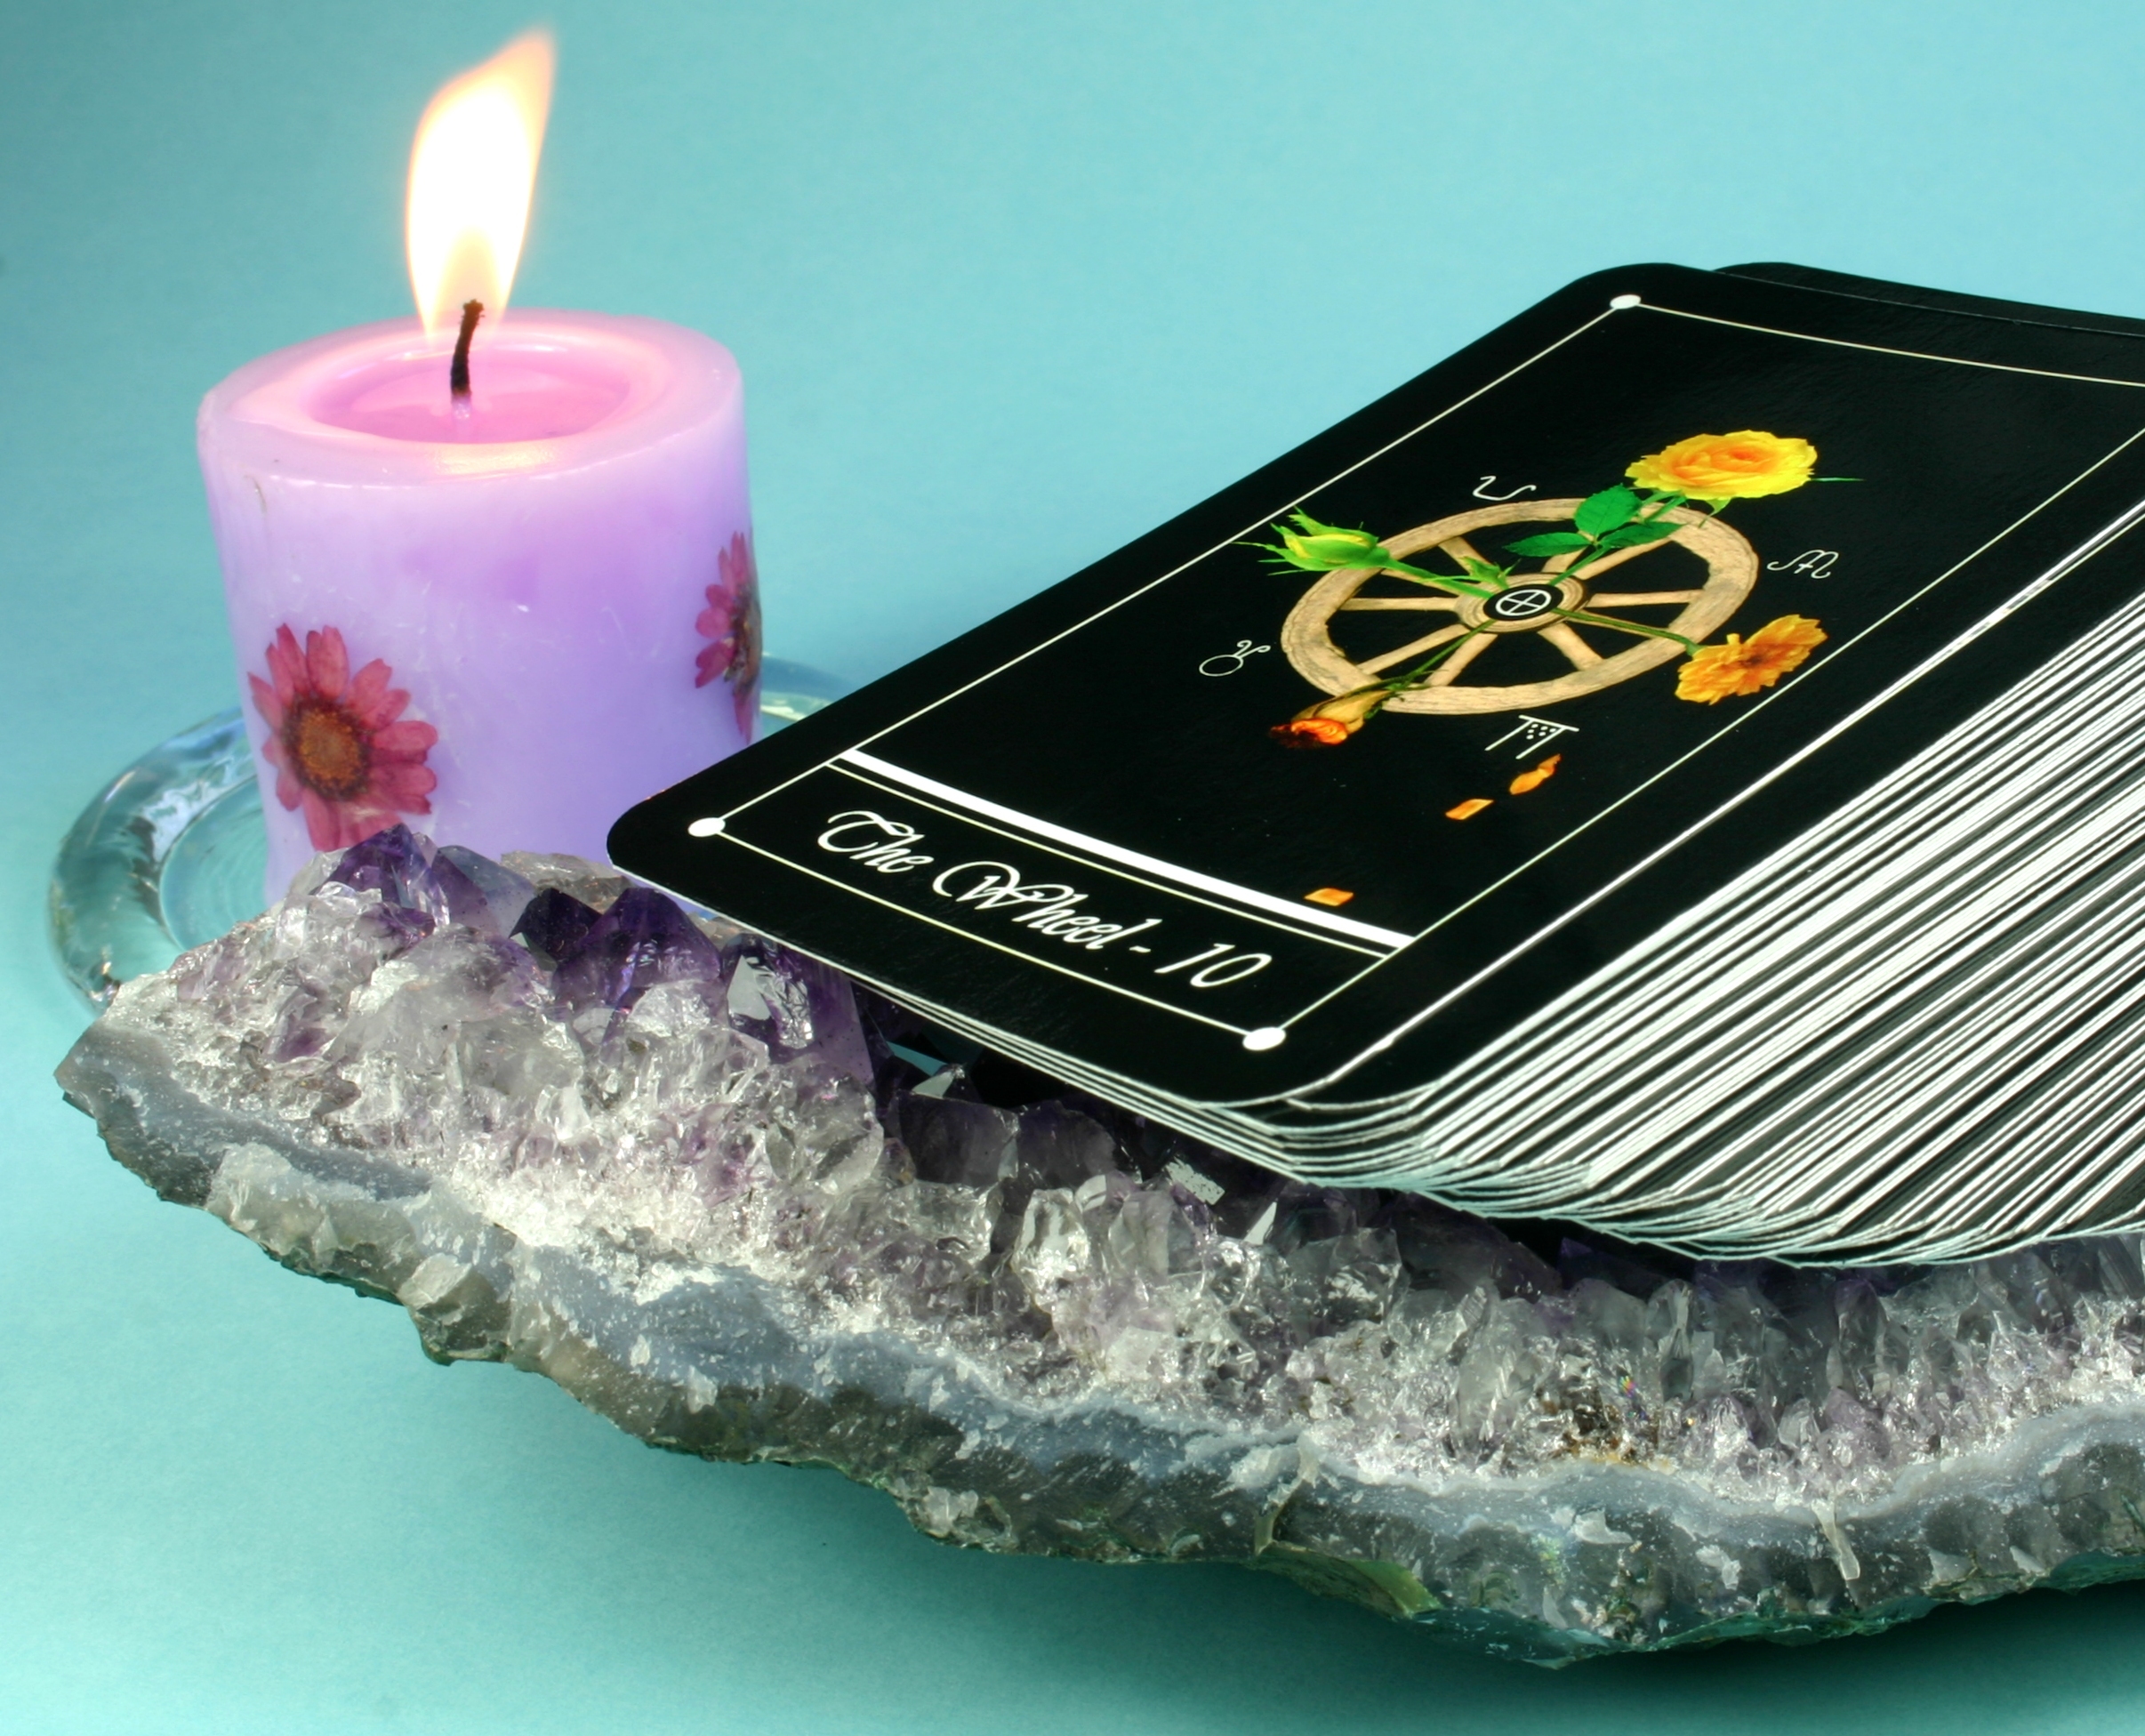 A pack of tarot cards being cleansed using crystals and a candle